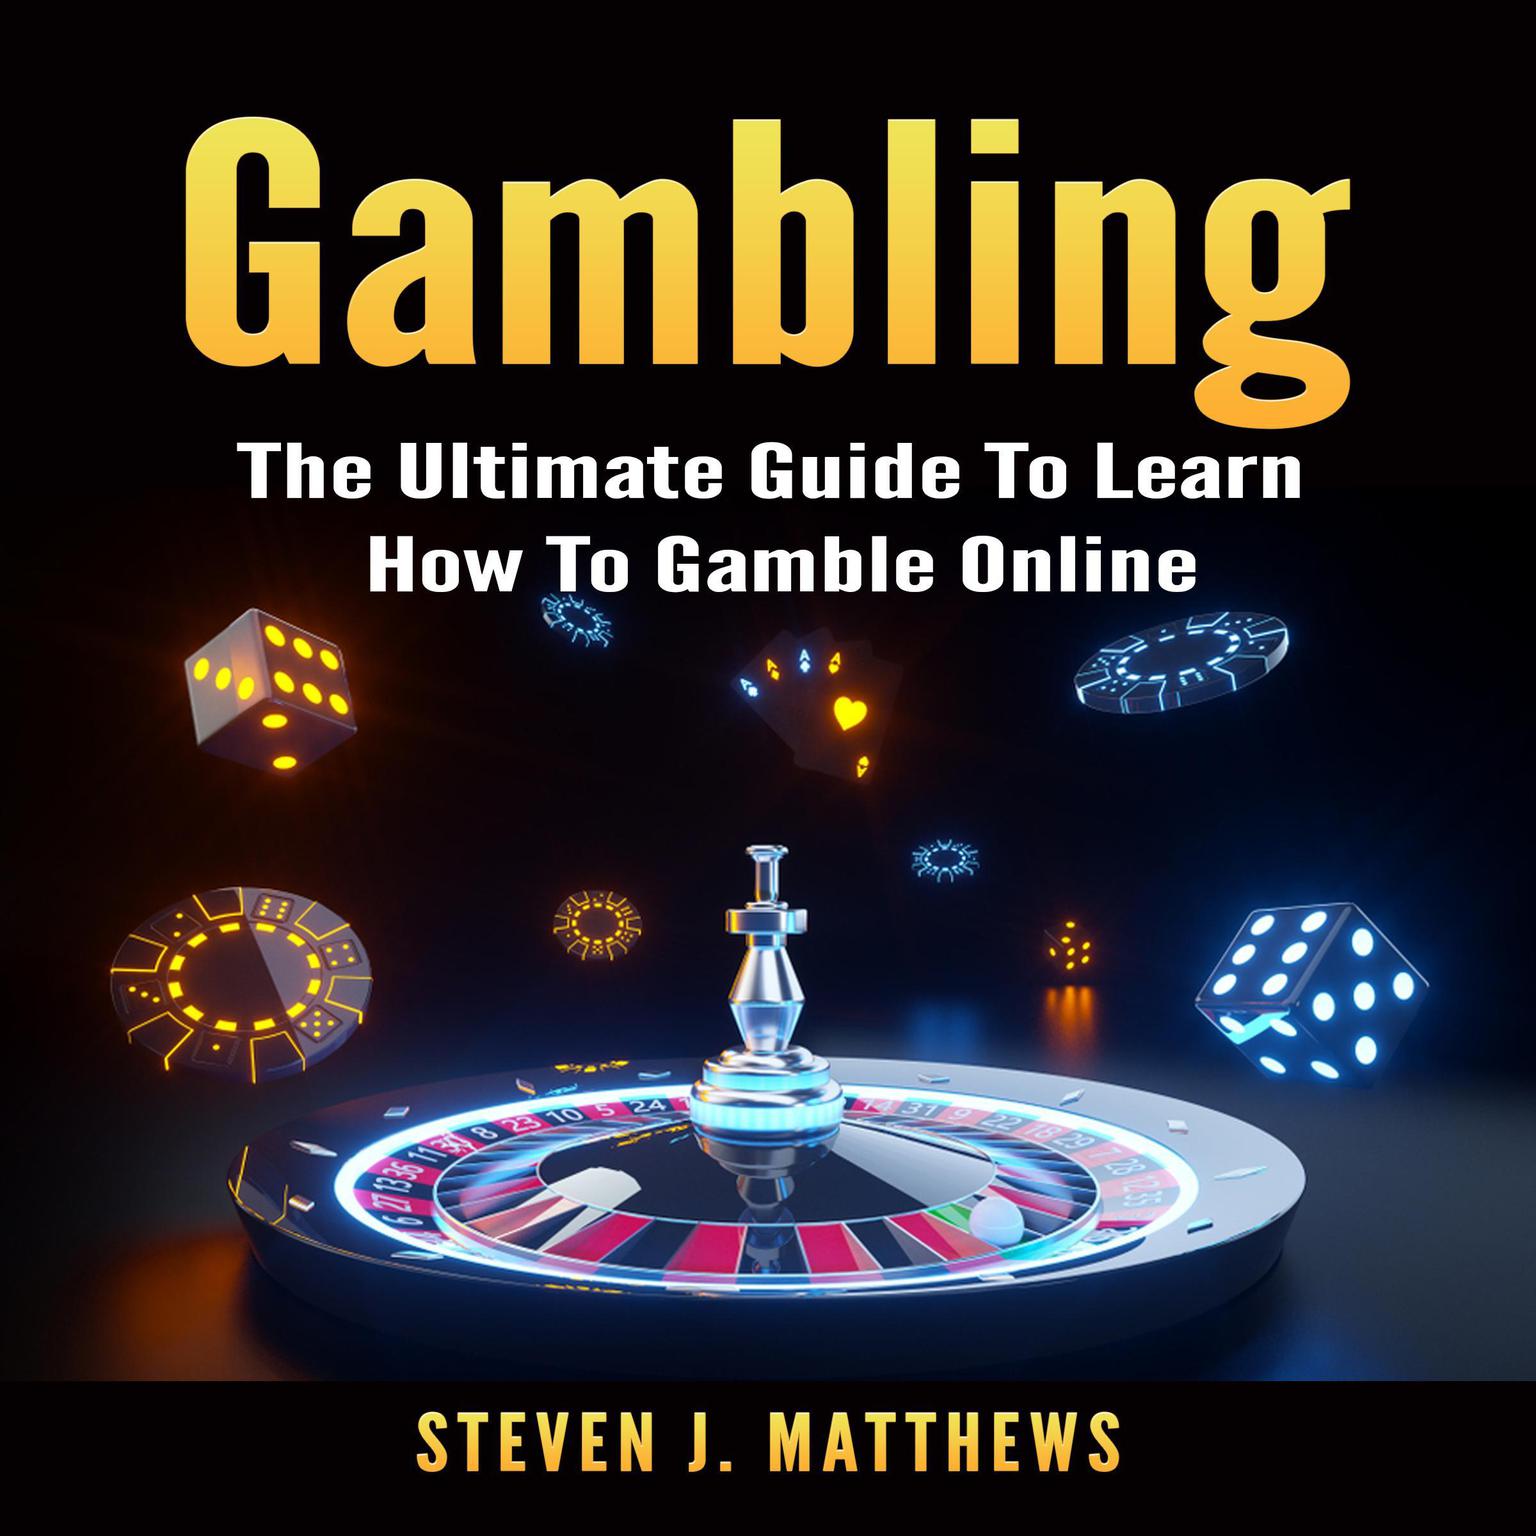 Gambling: The Ultimate Guide To Learn How To Gamble Online  Audiobook, by Steven J. Matthews